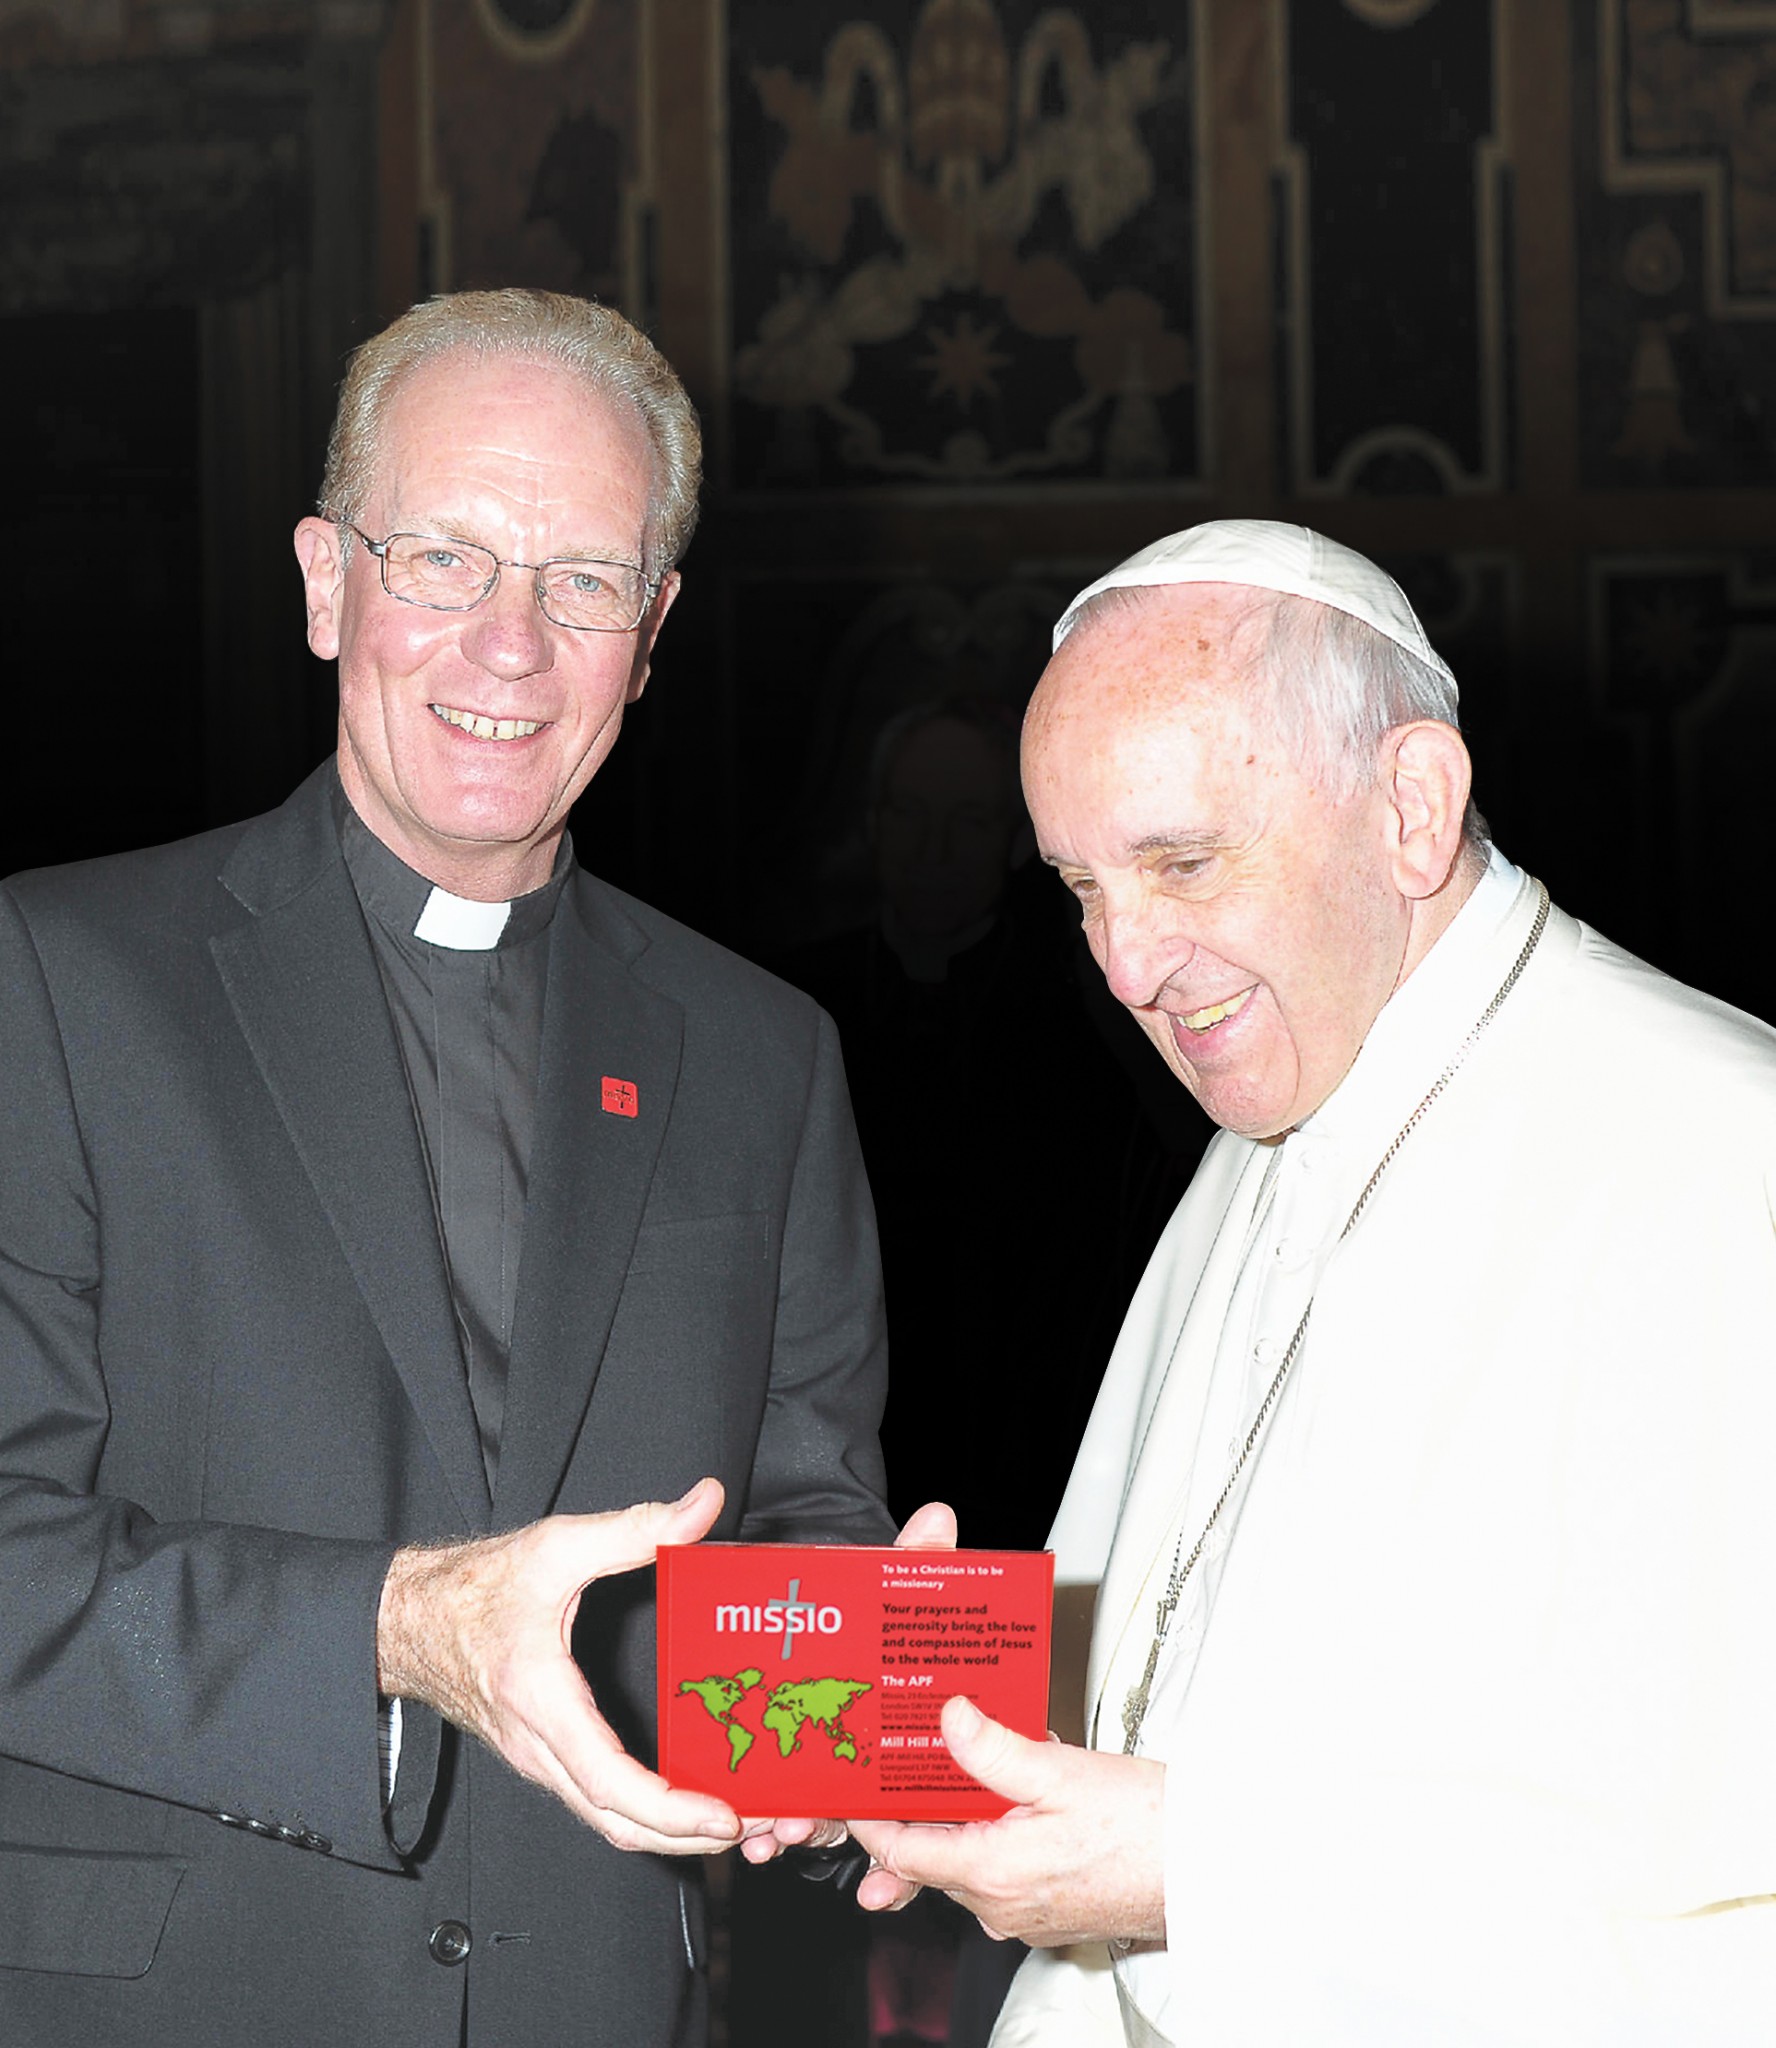 Father Anthony Chantry giving Pope Francis a Red Box